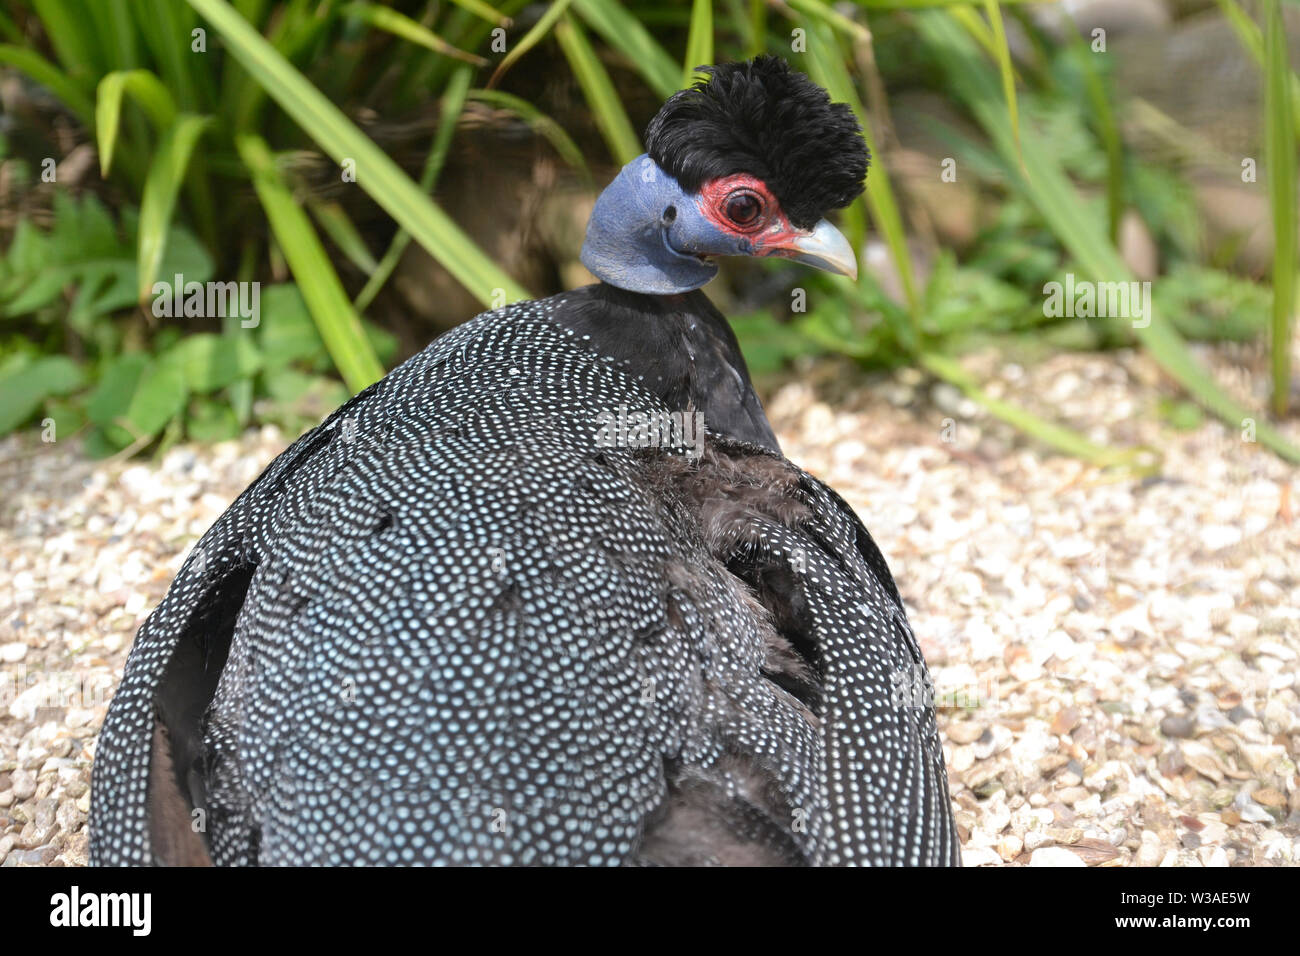 Kenyan / African Crested Guineafowl at Birdland Park and Gardens in Bourton-on-the-Water, Gloucestershire, UK Stock Photo